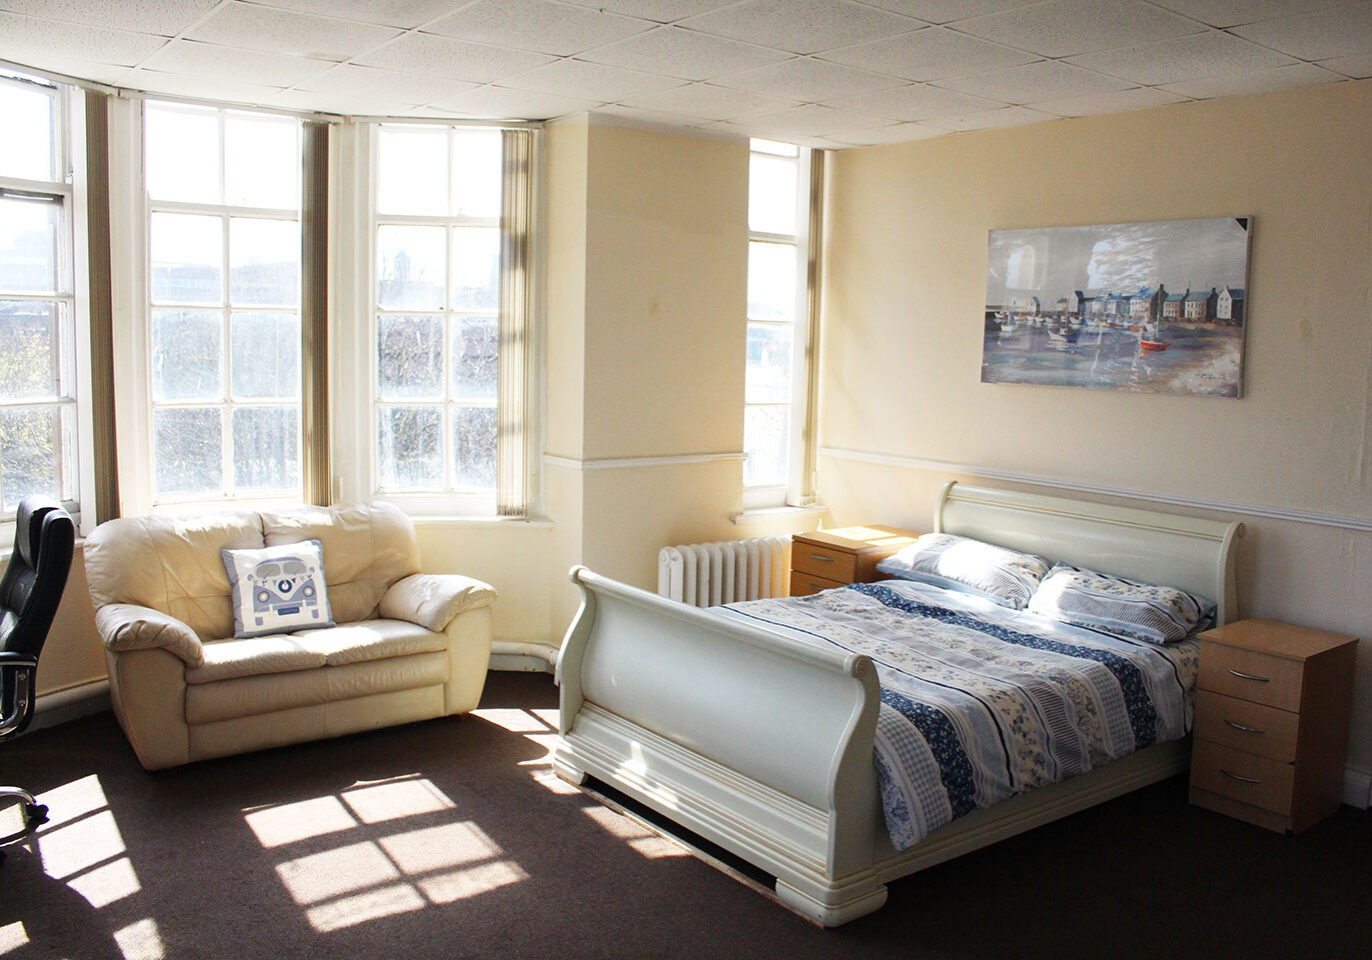 Affordable student accommodation single room